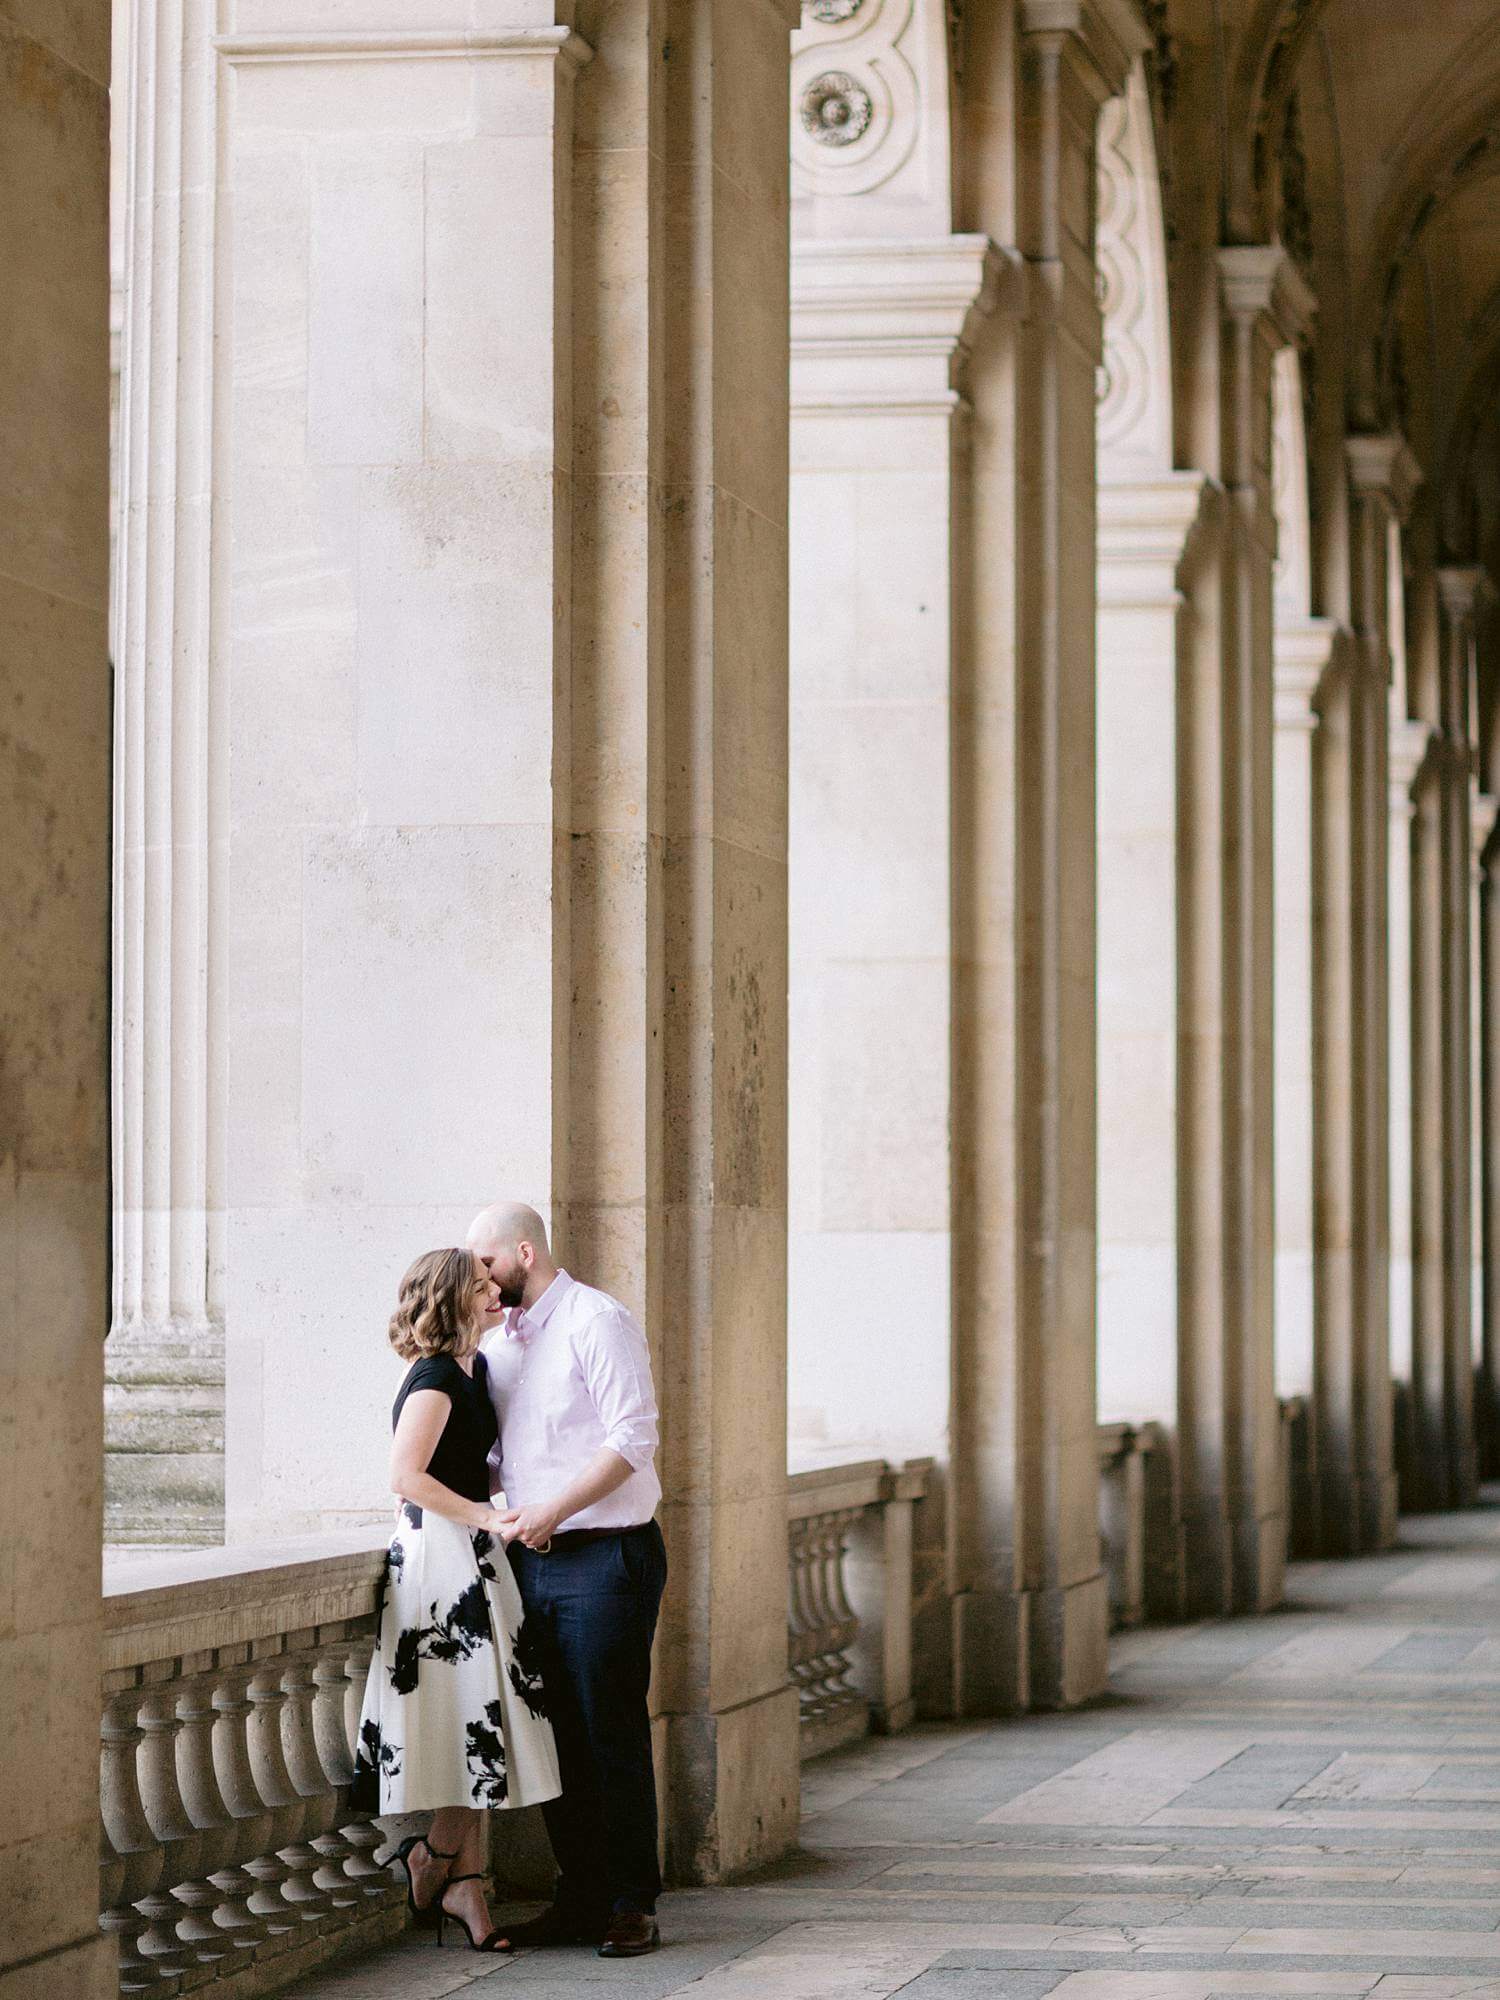 Couple embracing in hallway of Louvre Museum